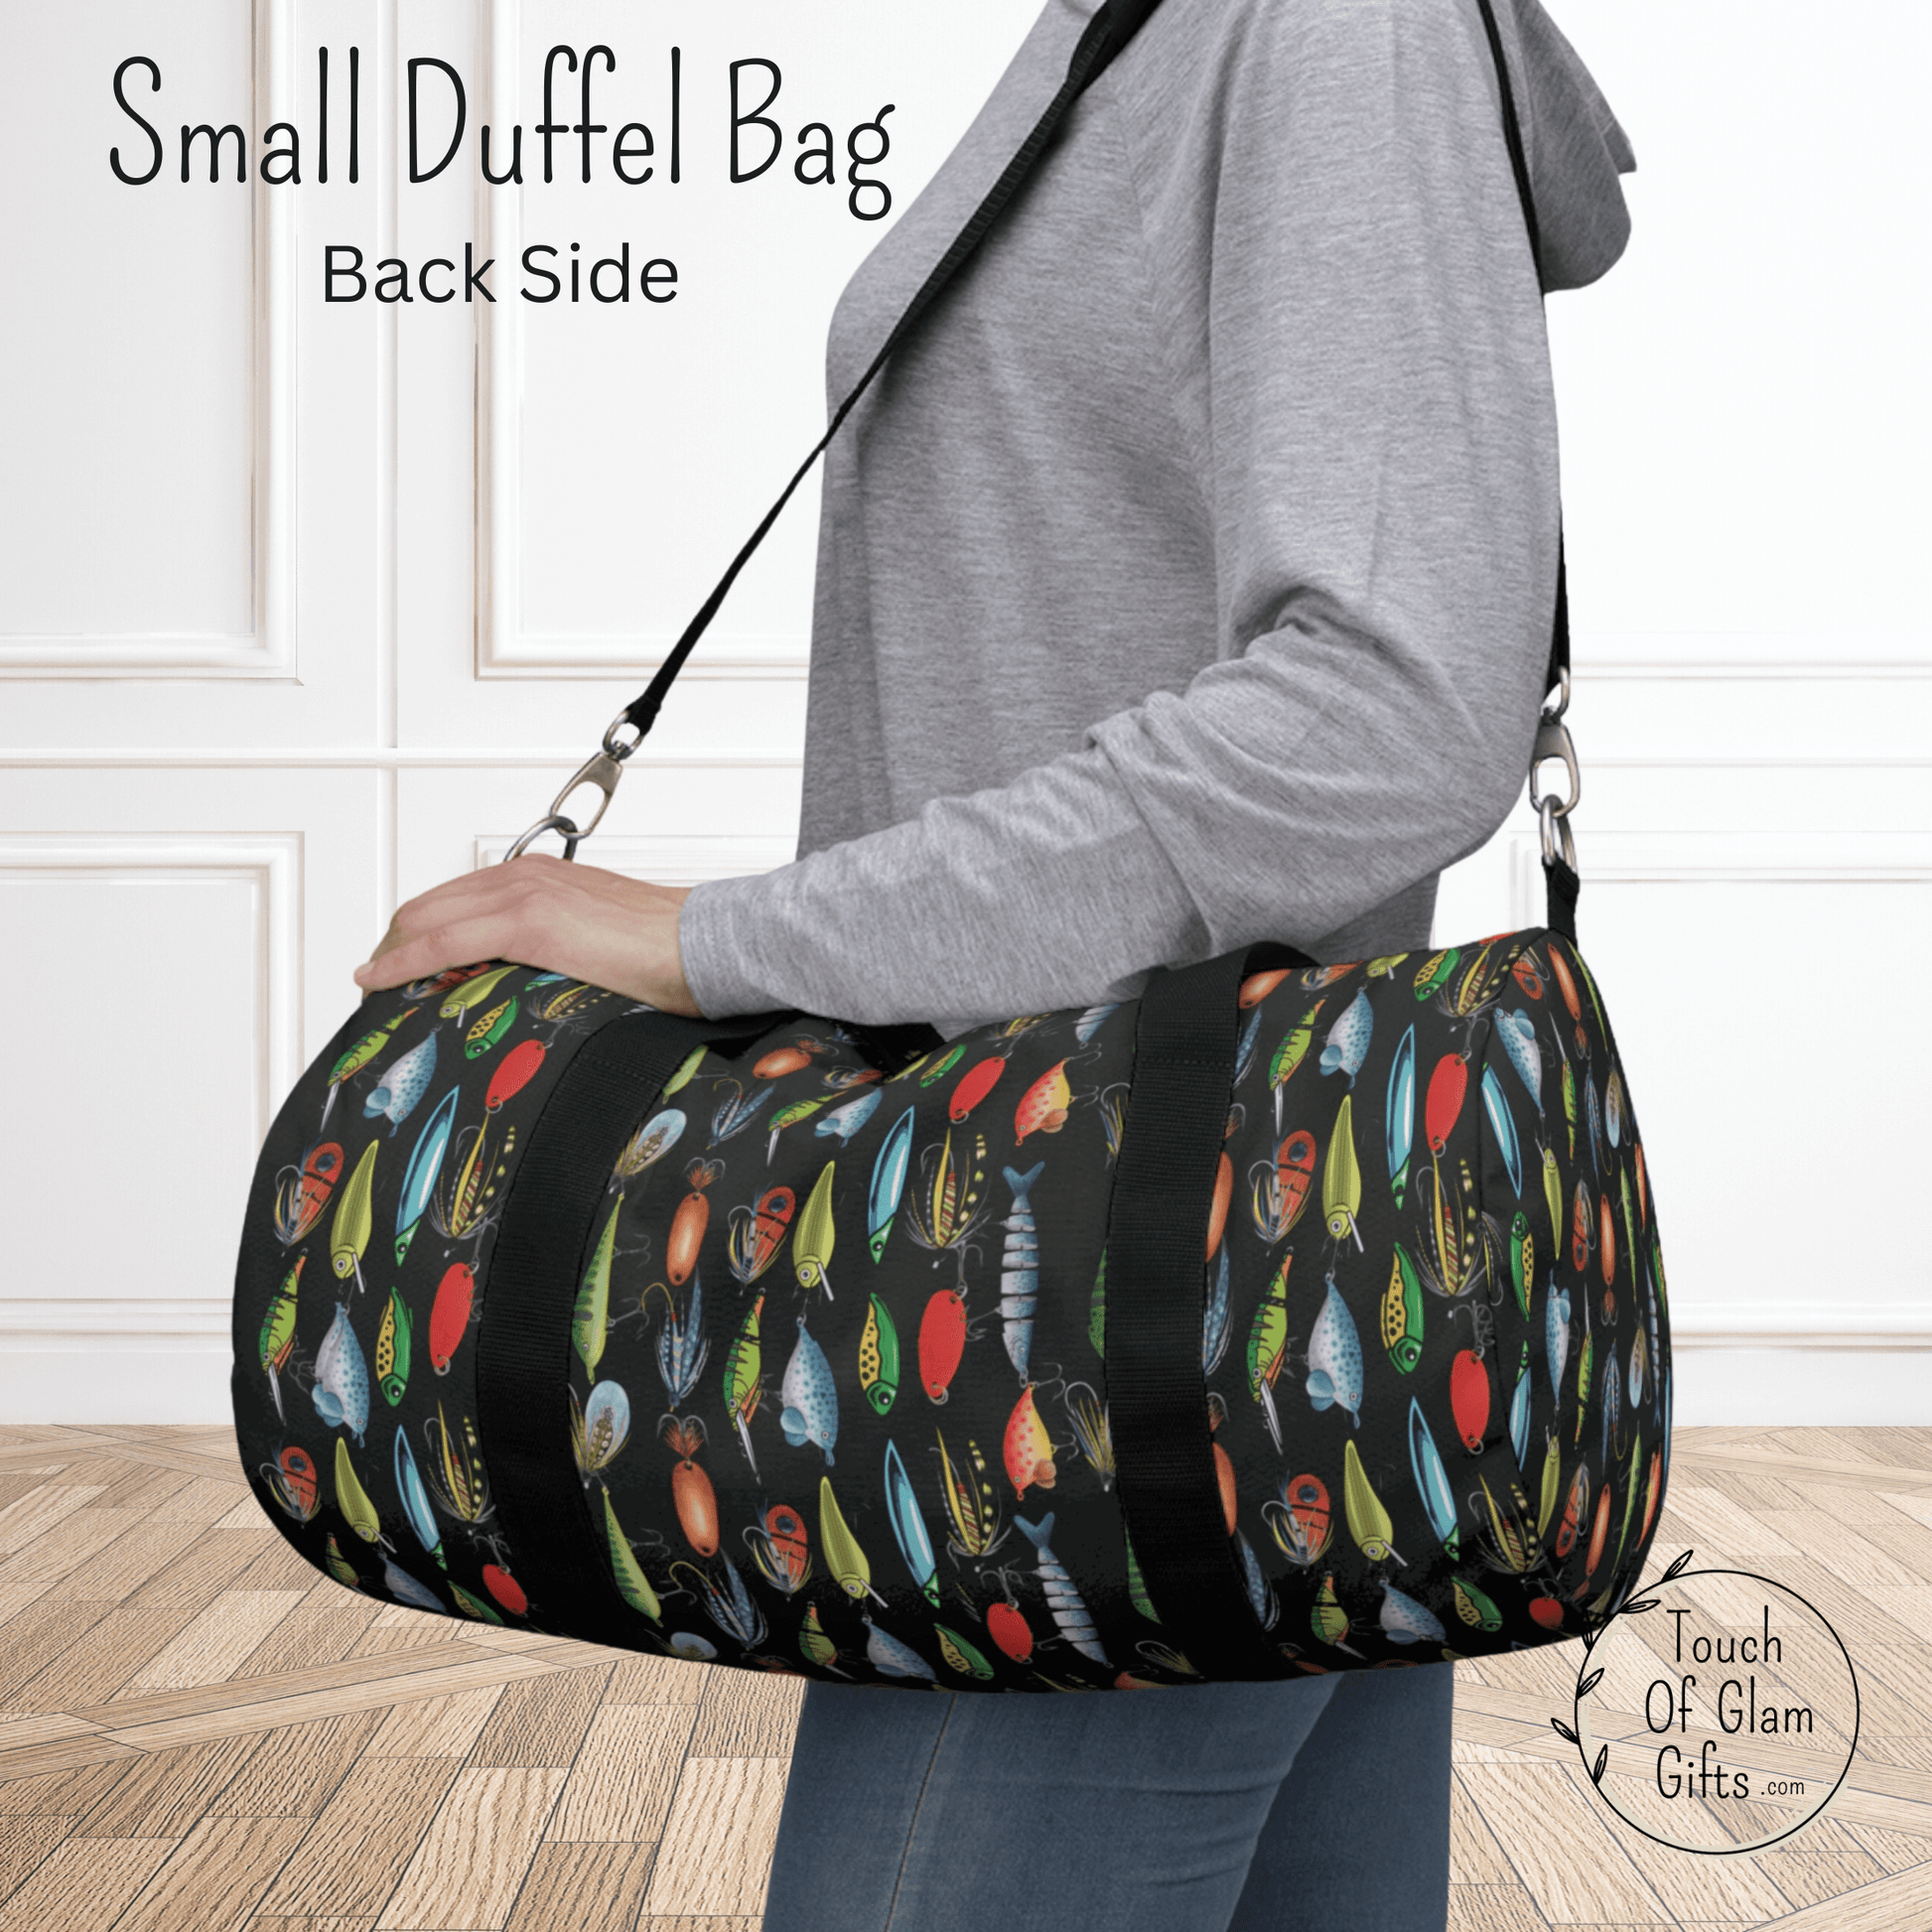 Our fishing lure shoulder bag or weekender bag for men or women who love fishing is shown in the small duffel bag size on a model.